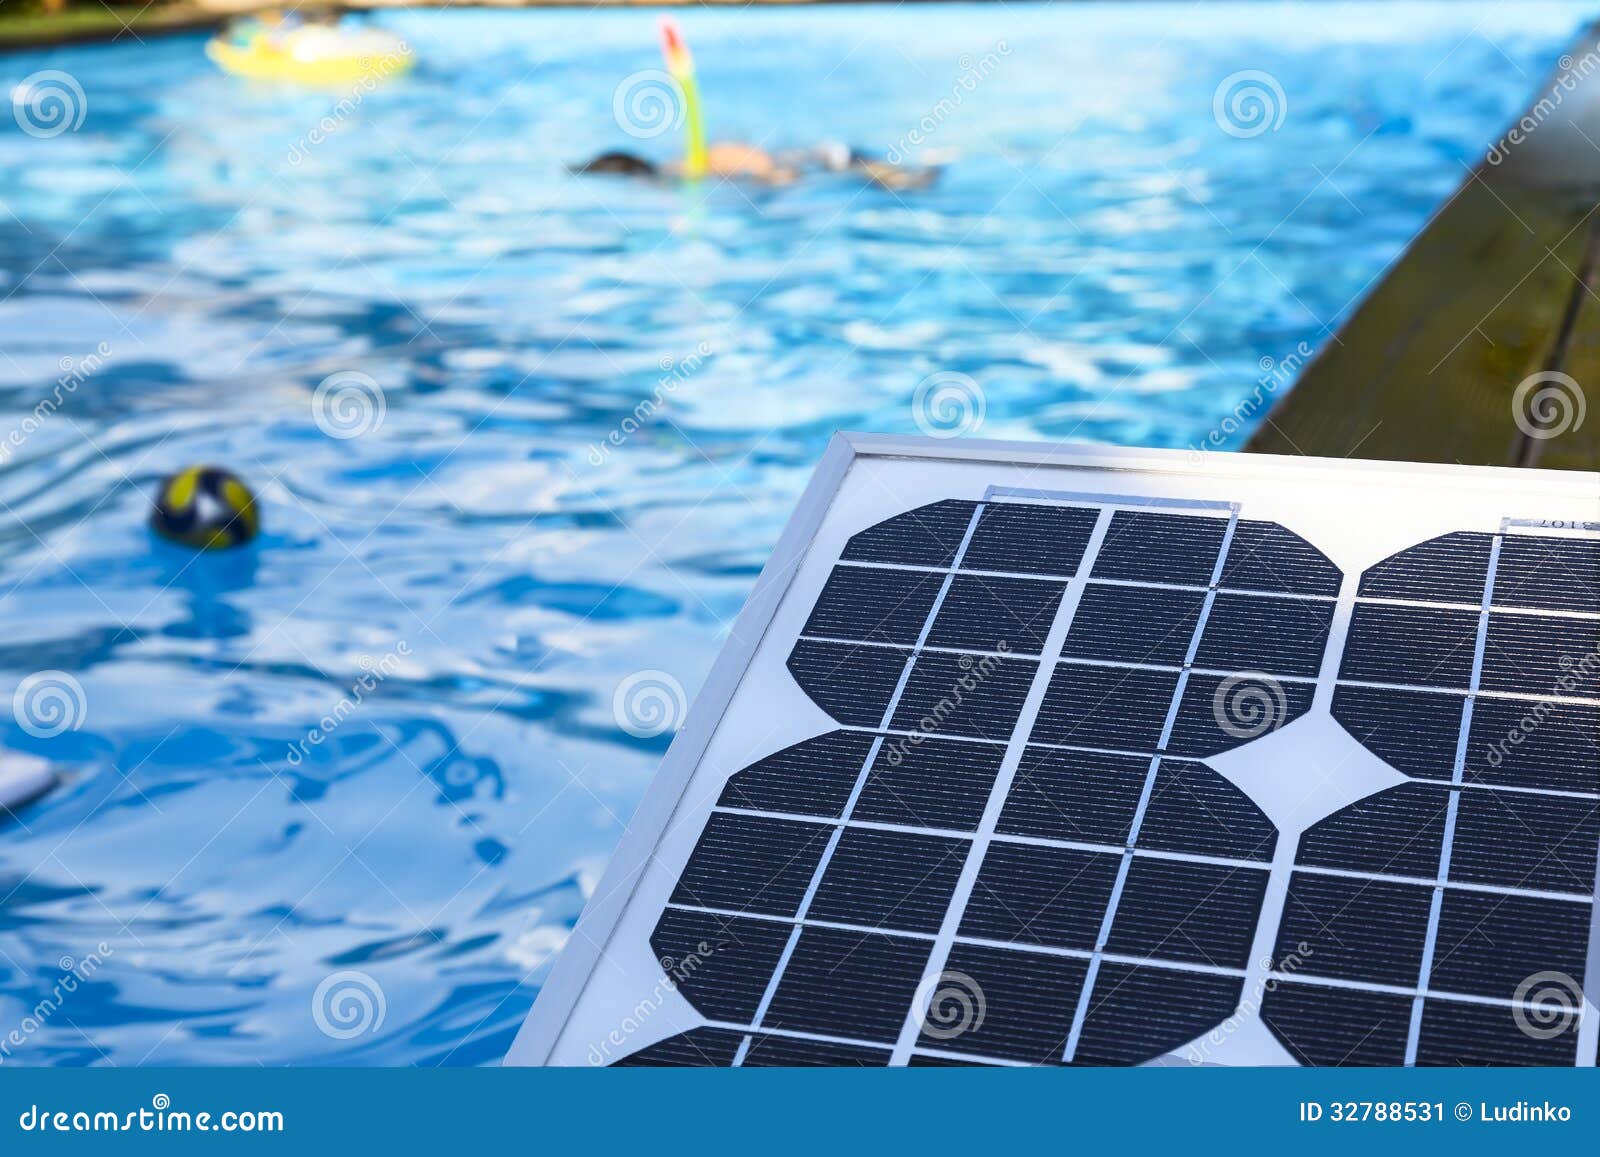 Photovoltaic Solar Panel For Heating Water Stock Image - Image 